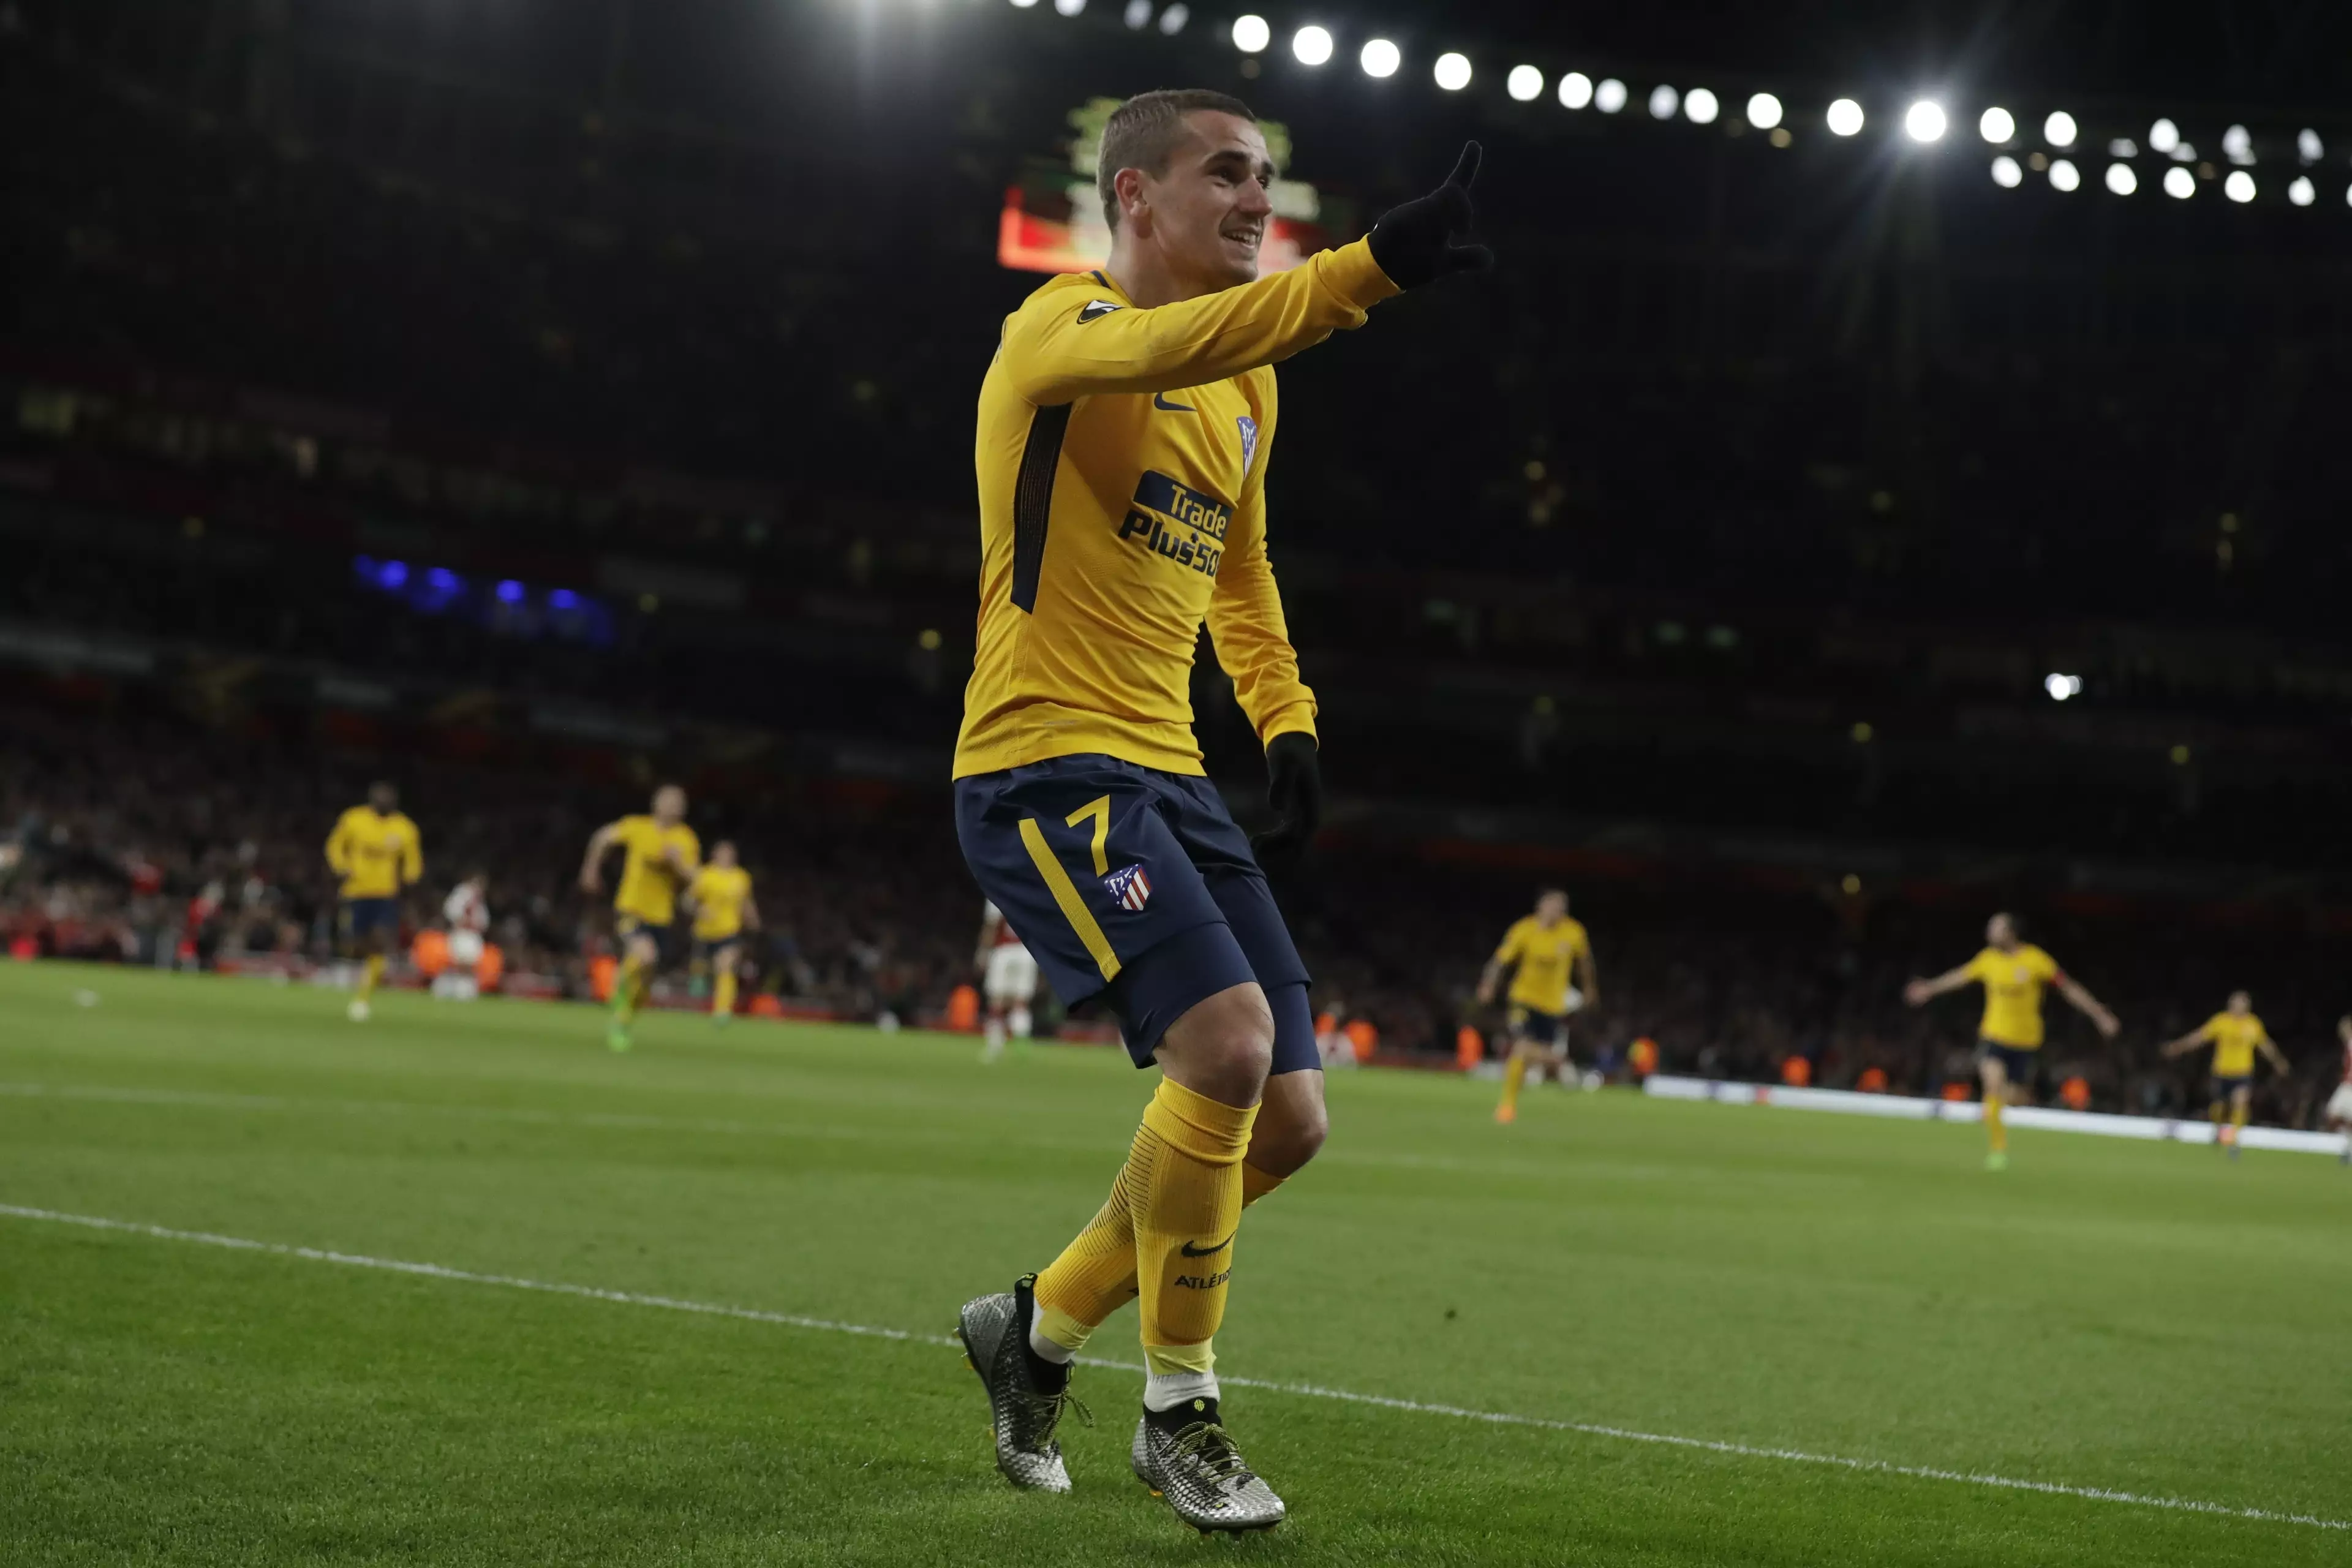 Griezmann's first leg goal went a long way to knocking Arsenal out. Image: PA Images